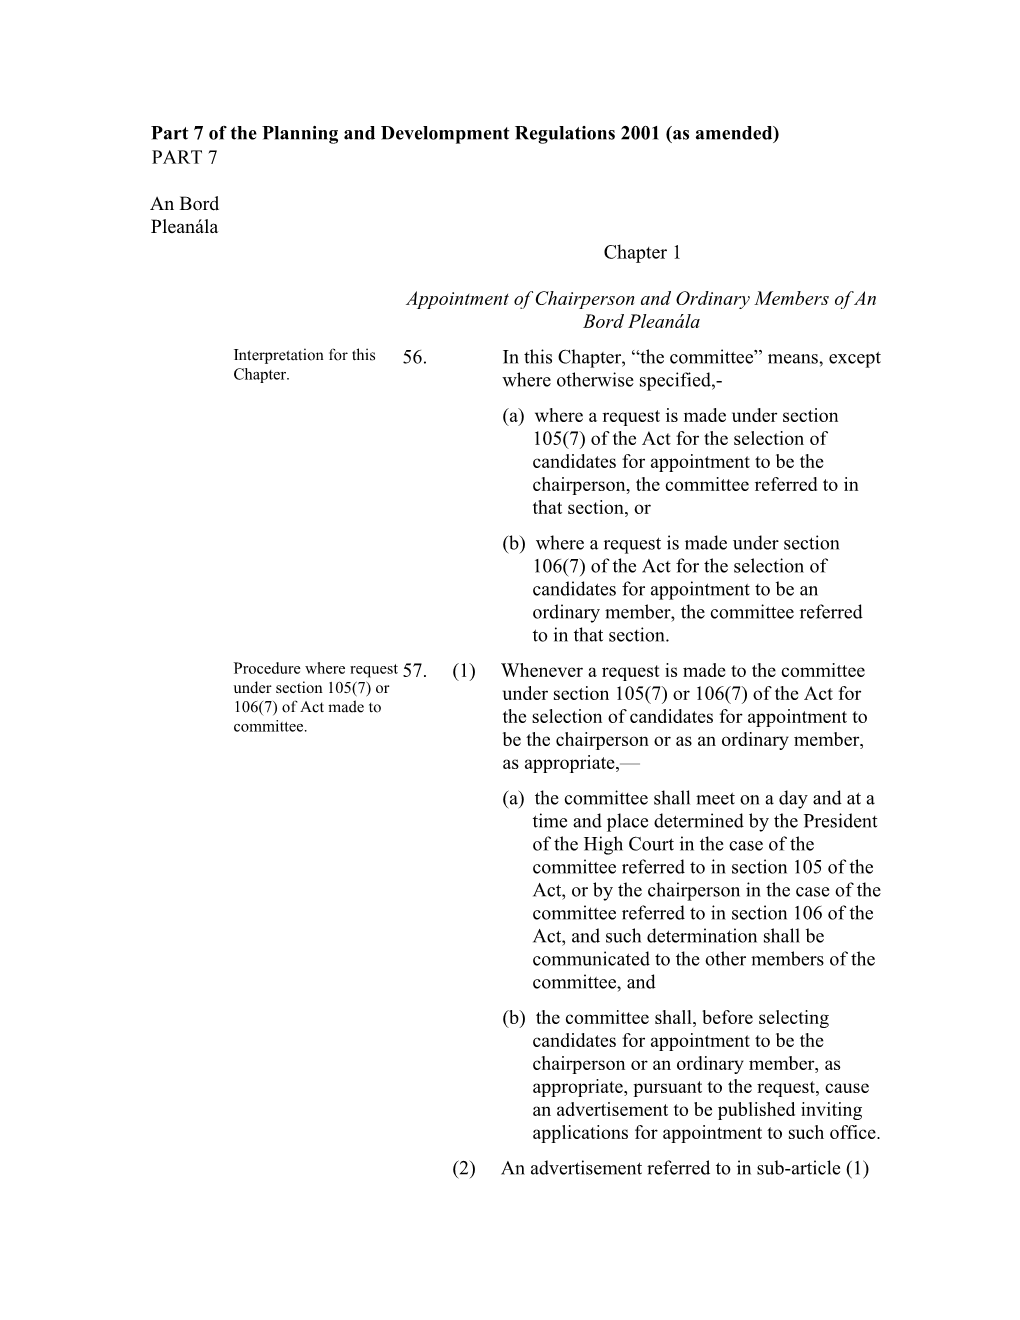 Part 7 of the Planning and Develompment Regulations 2001 (As Amended)